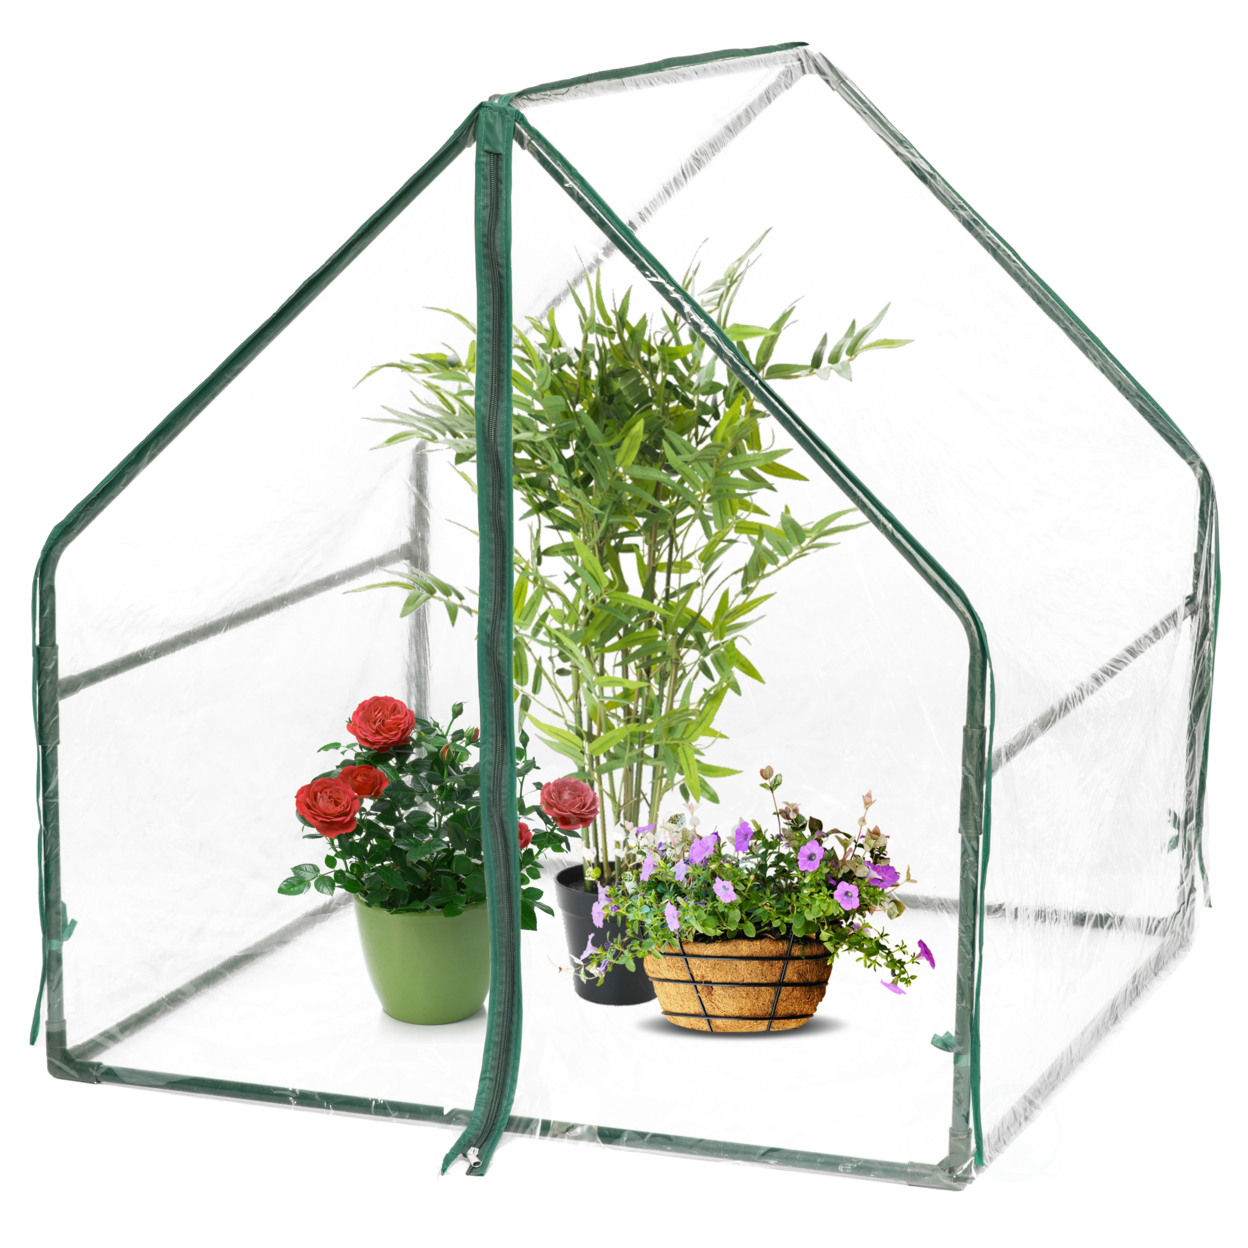 Green Outdoor Waterproof Portable Plant Greenhouse With 2 Clear Zippered Windows - Small